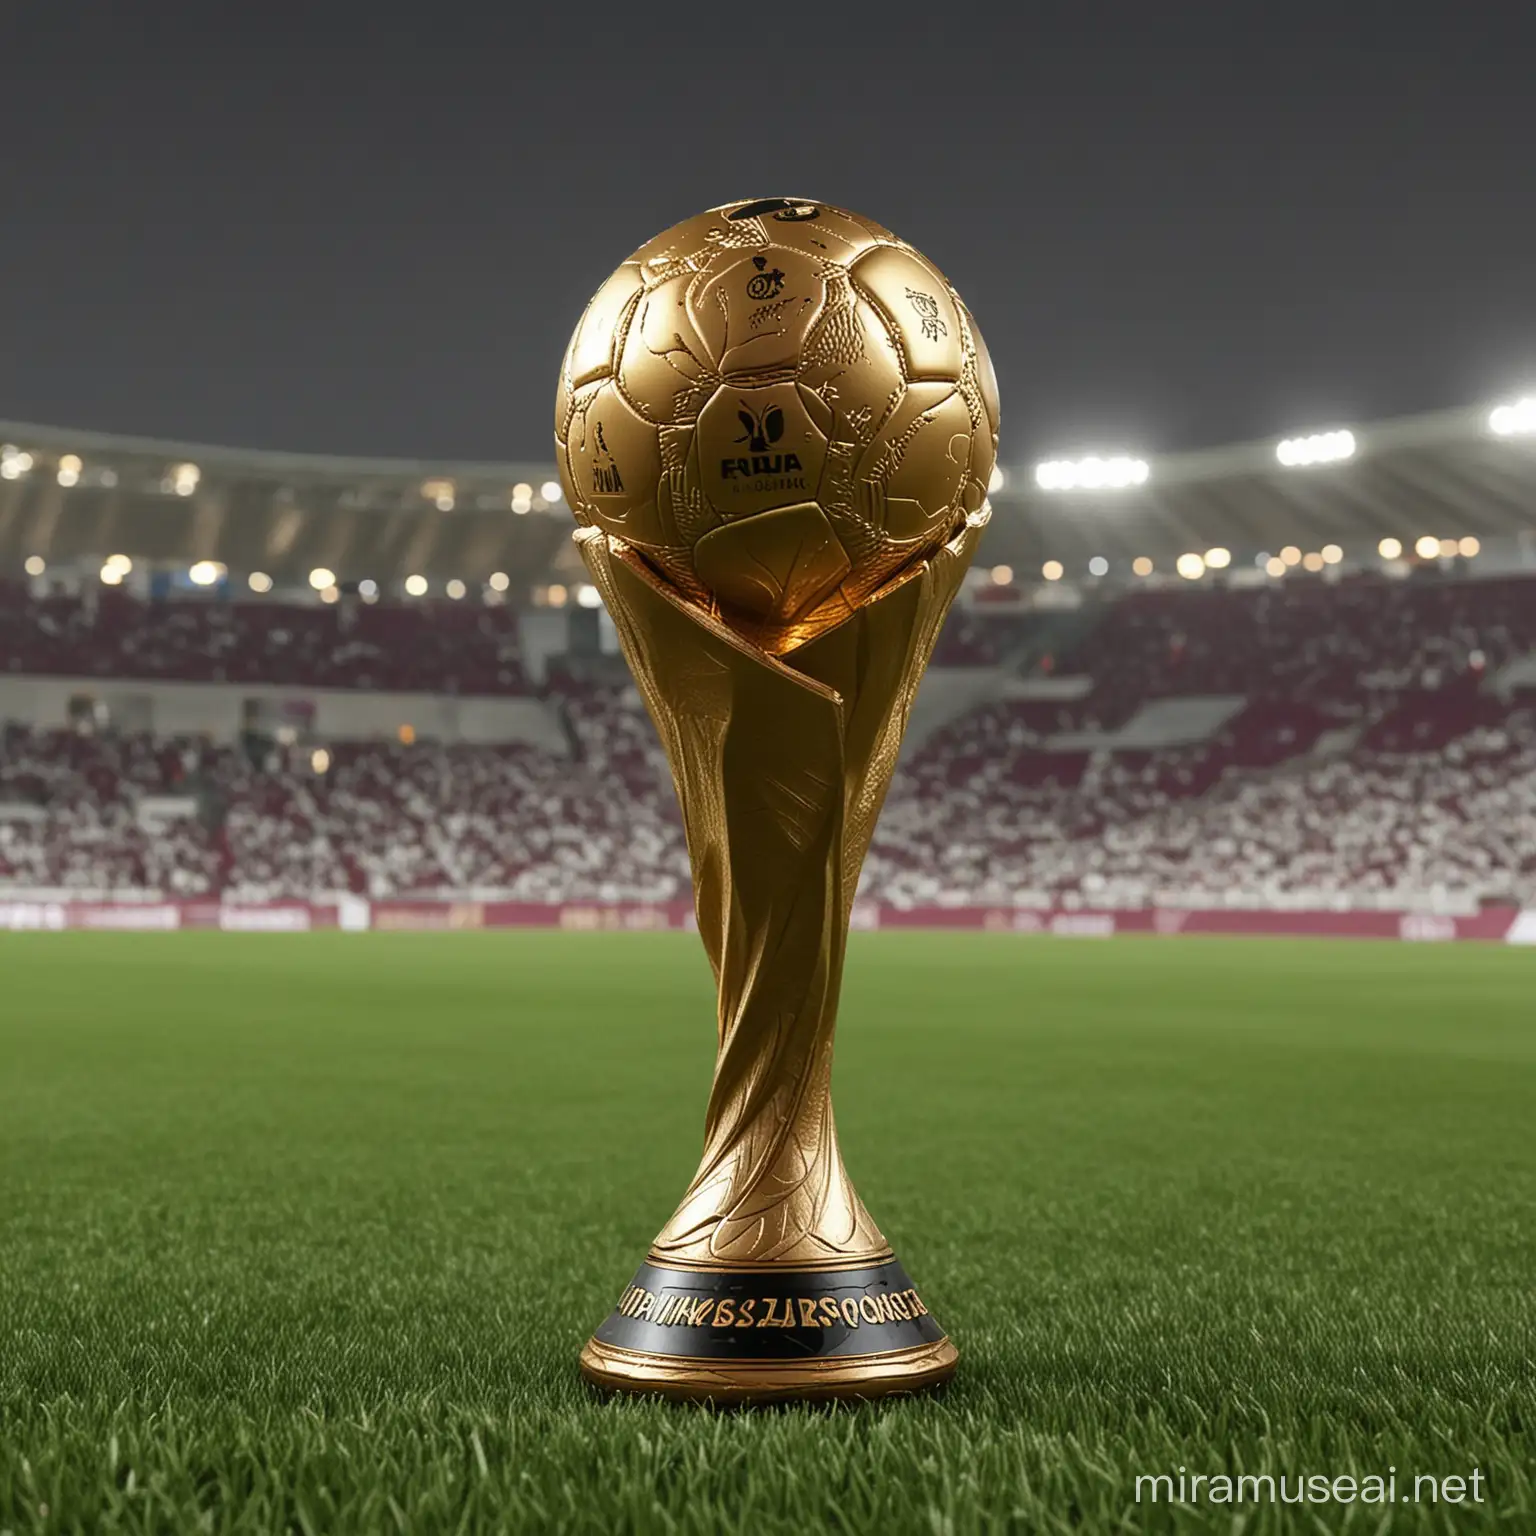 Exciting Moments at FIFA World Cup Qatar 2022